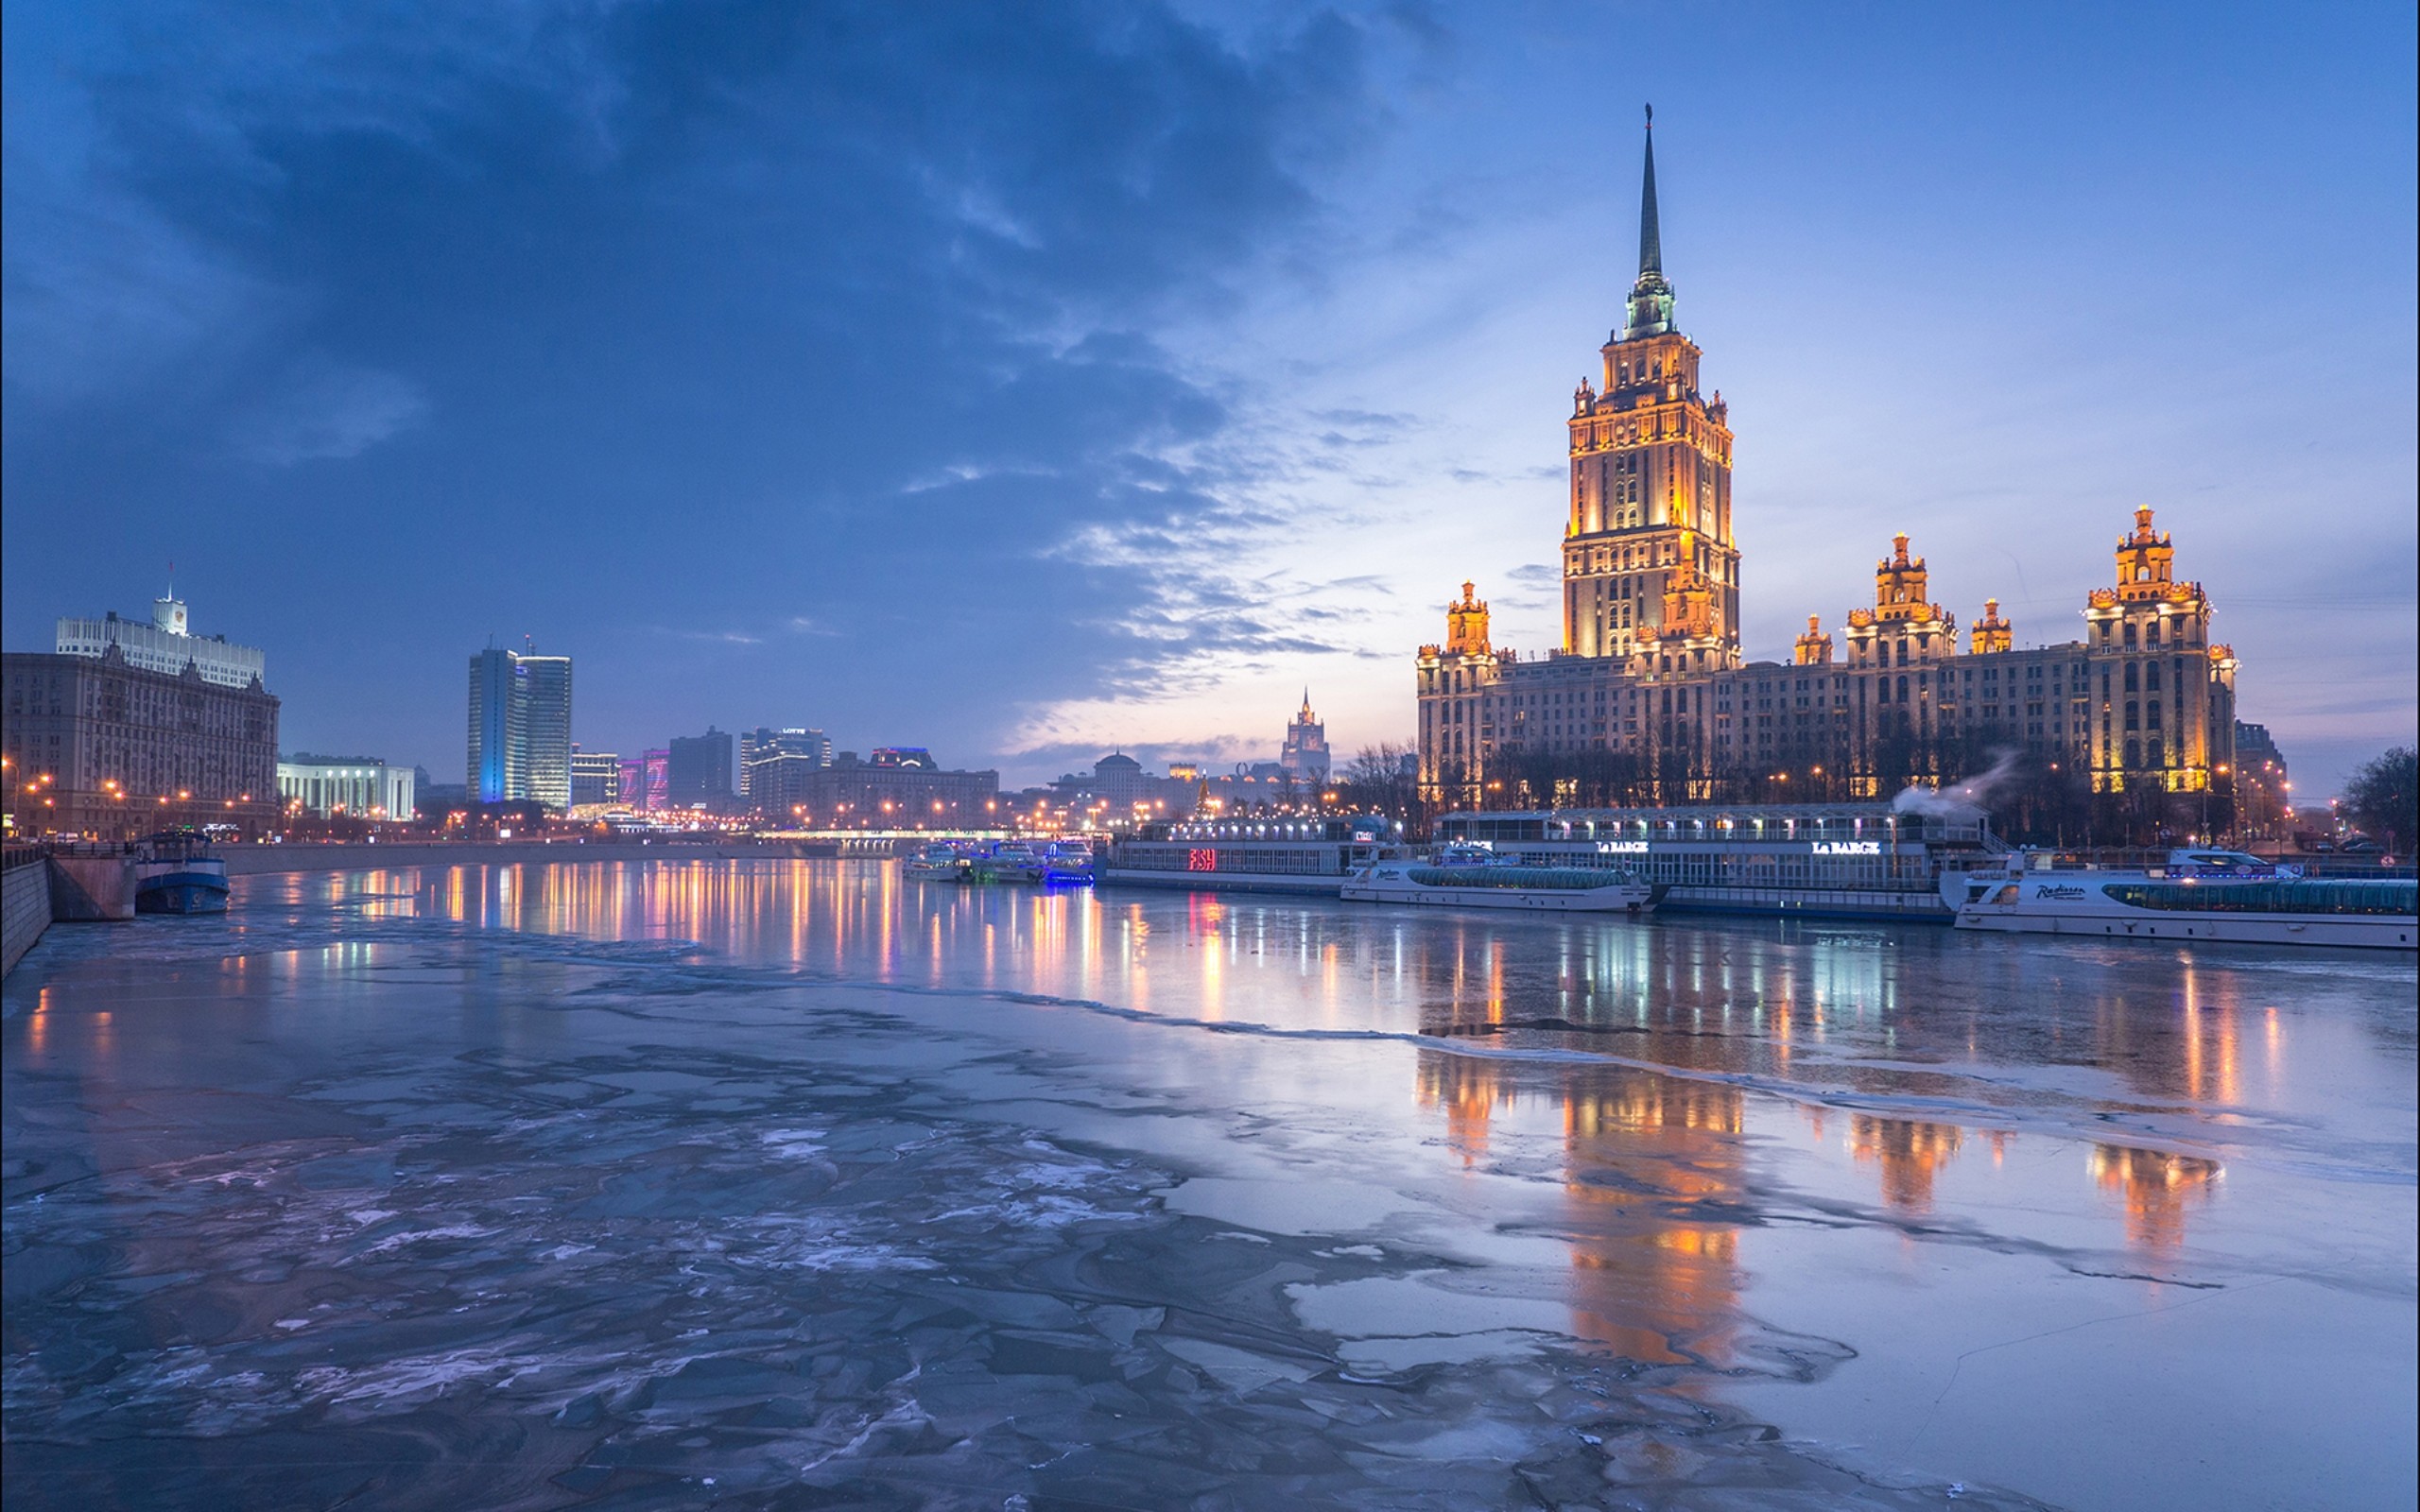 General 2560x1600 architecture Moscow Russia cityscape ice city lights cold winter